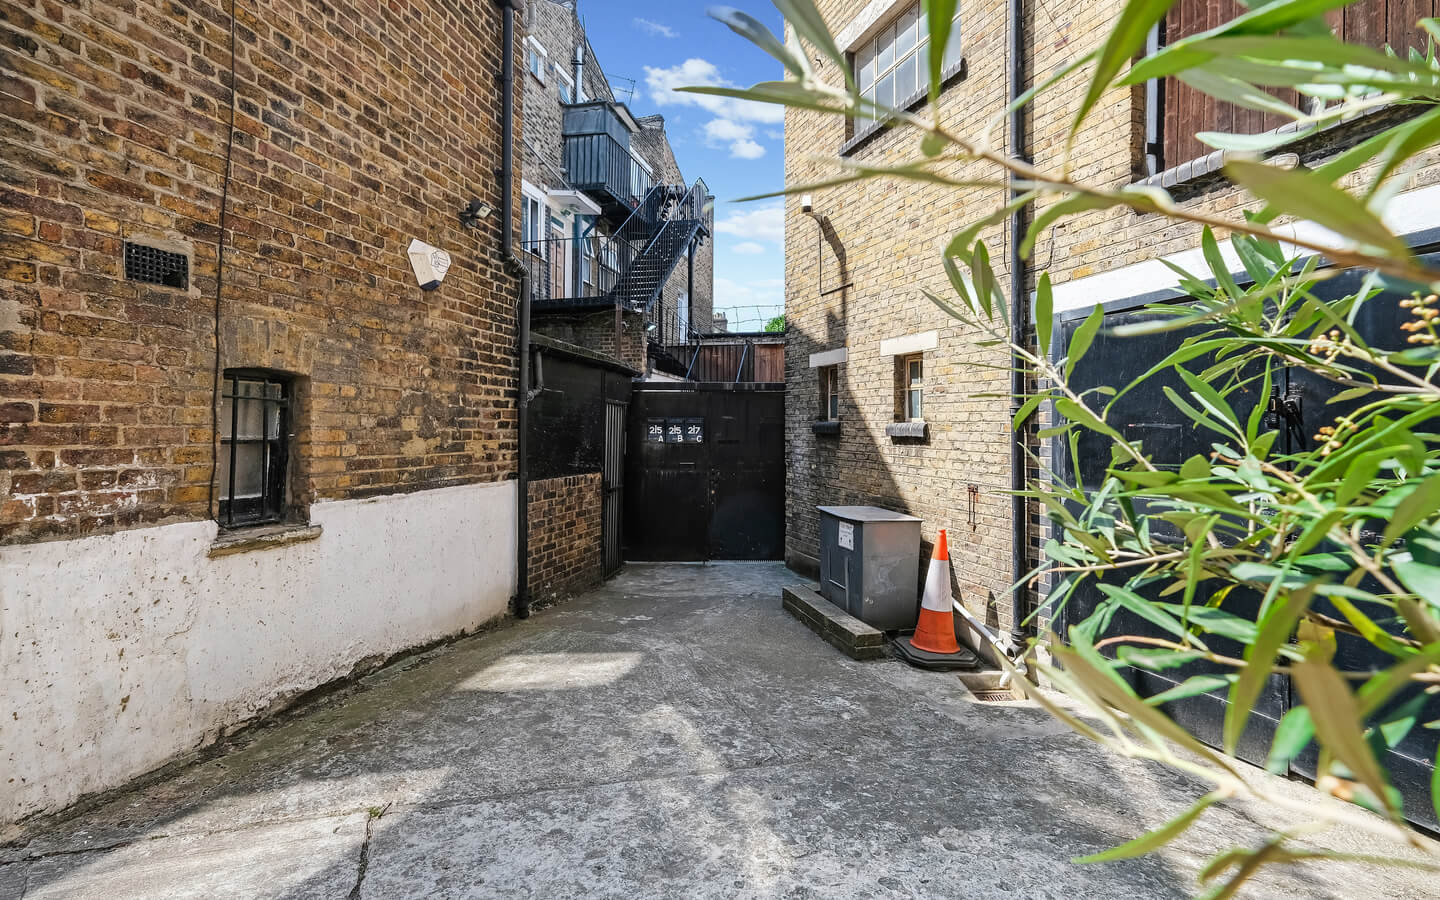 Commercial Property For Rent in Hackney London